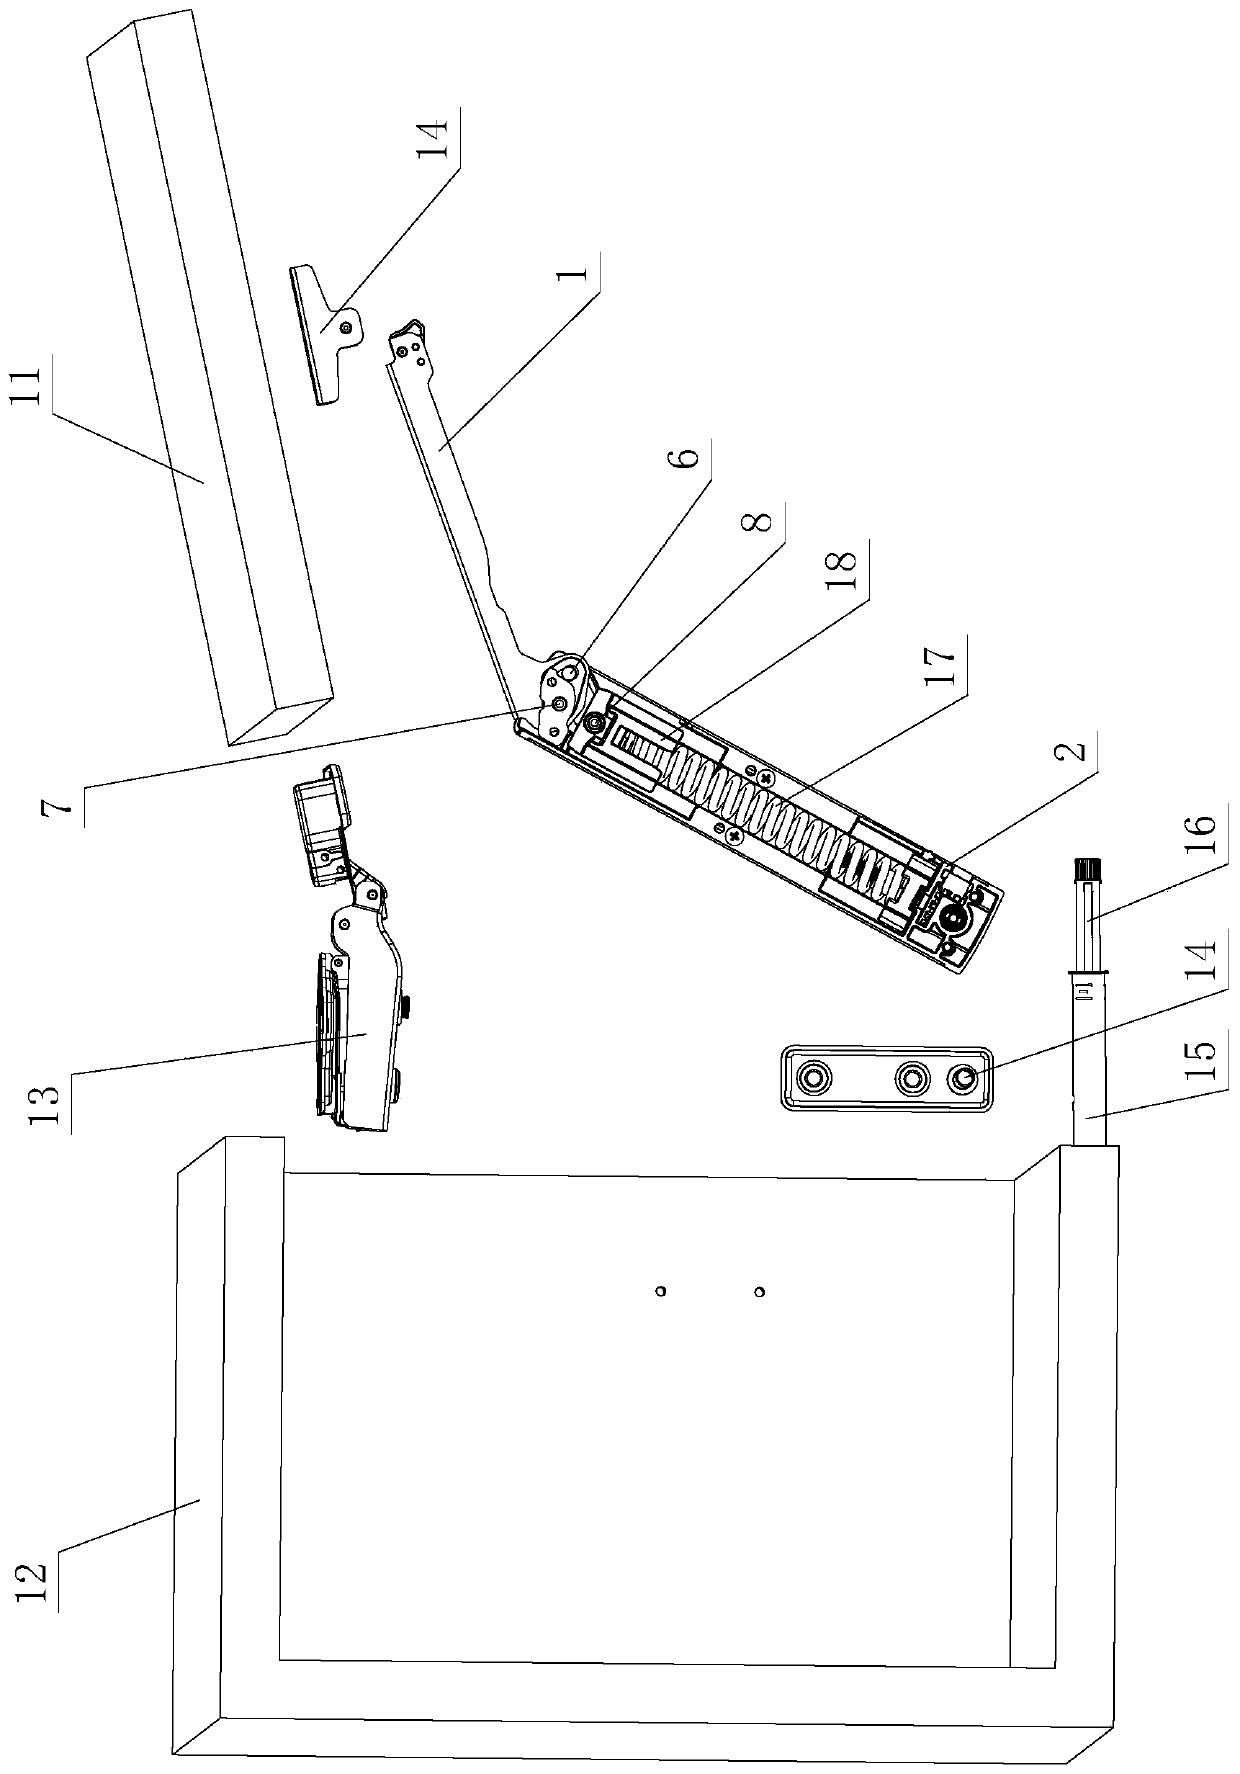 Upturning structure used for automatic opening and closing of furniture